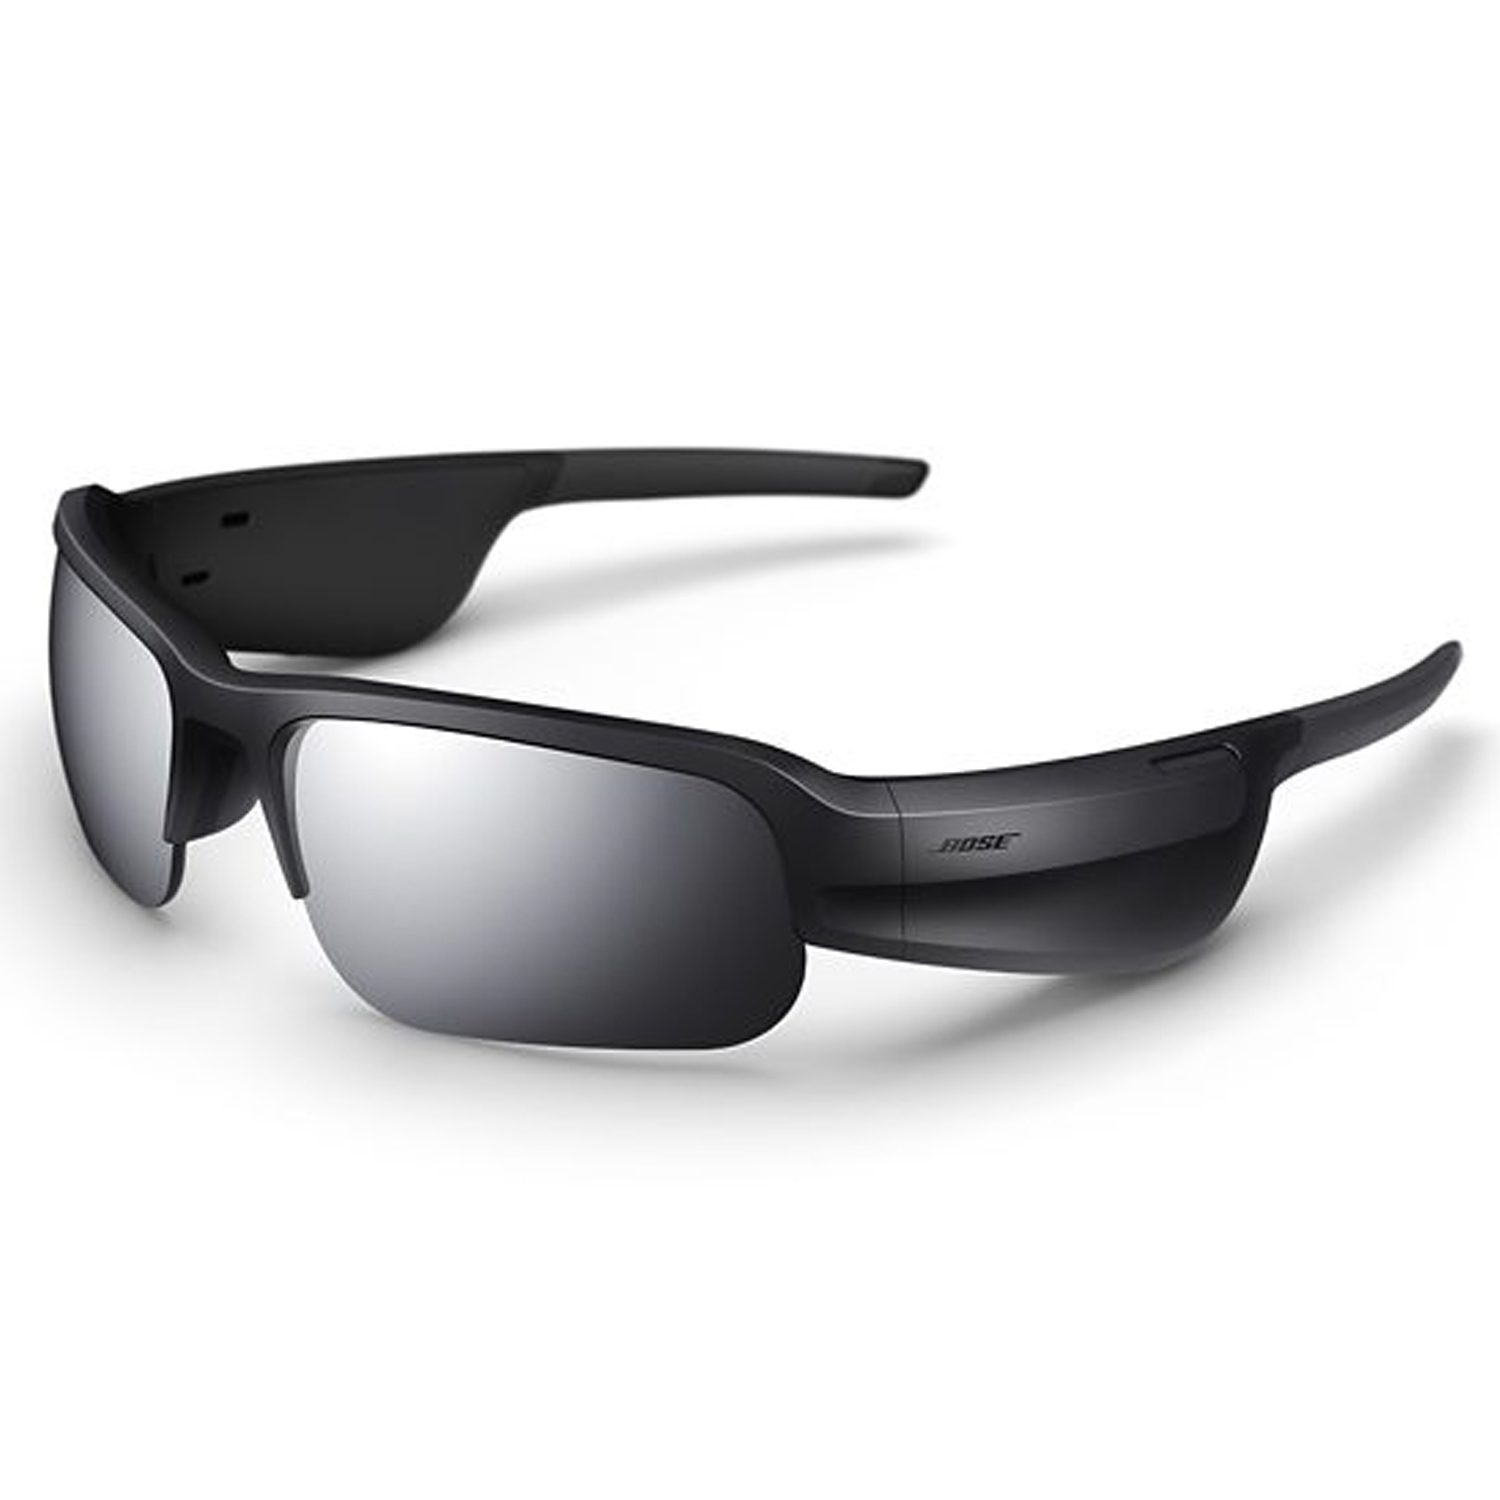 Bose Frames Tempo Bluetooth Sports Sunglasses with Polarized Lenses, Black - image 1 of 12